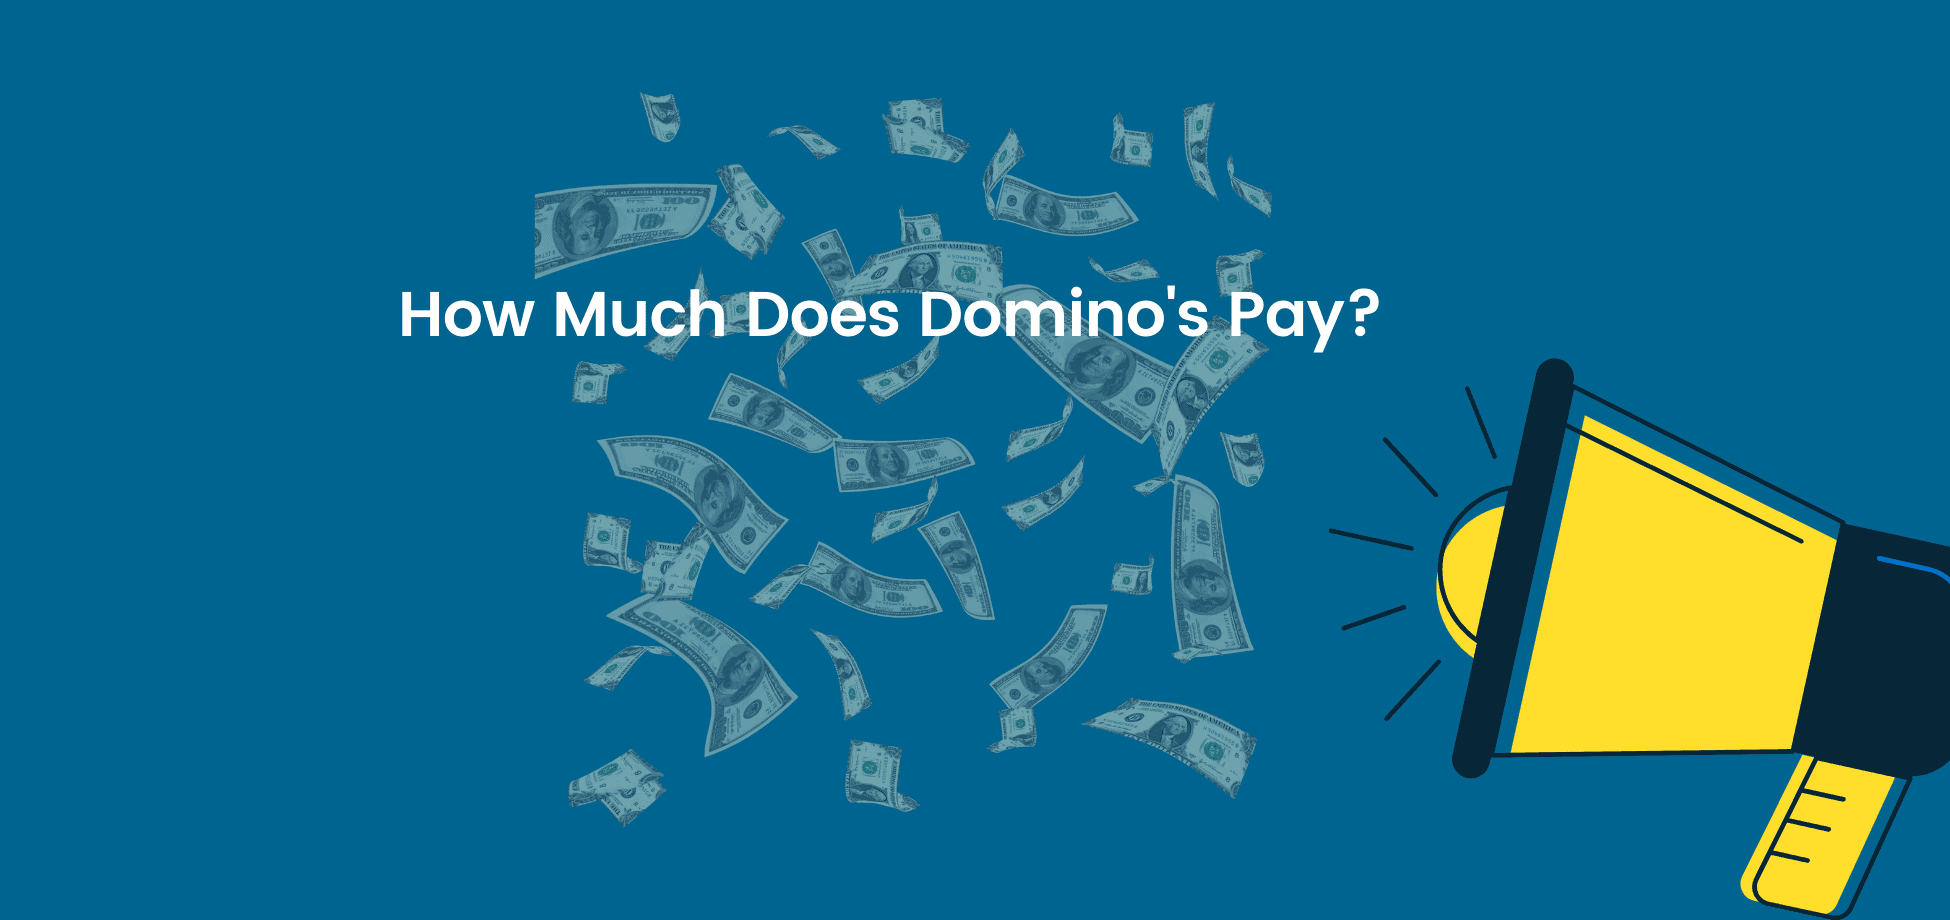 Domino's salaries greatly differ from store to store and state by state, so it's wise to conduct some of your own research in your area before applying.